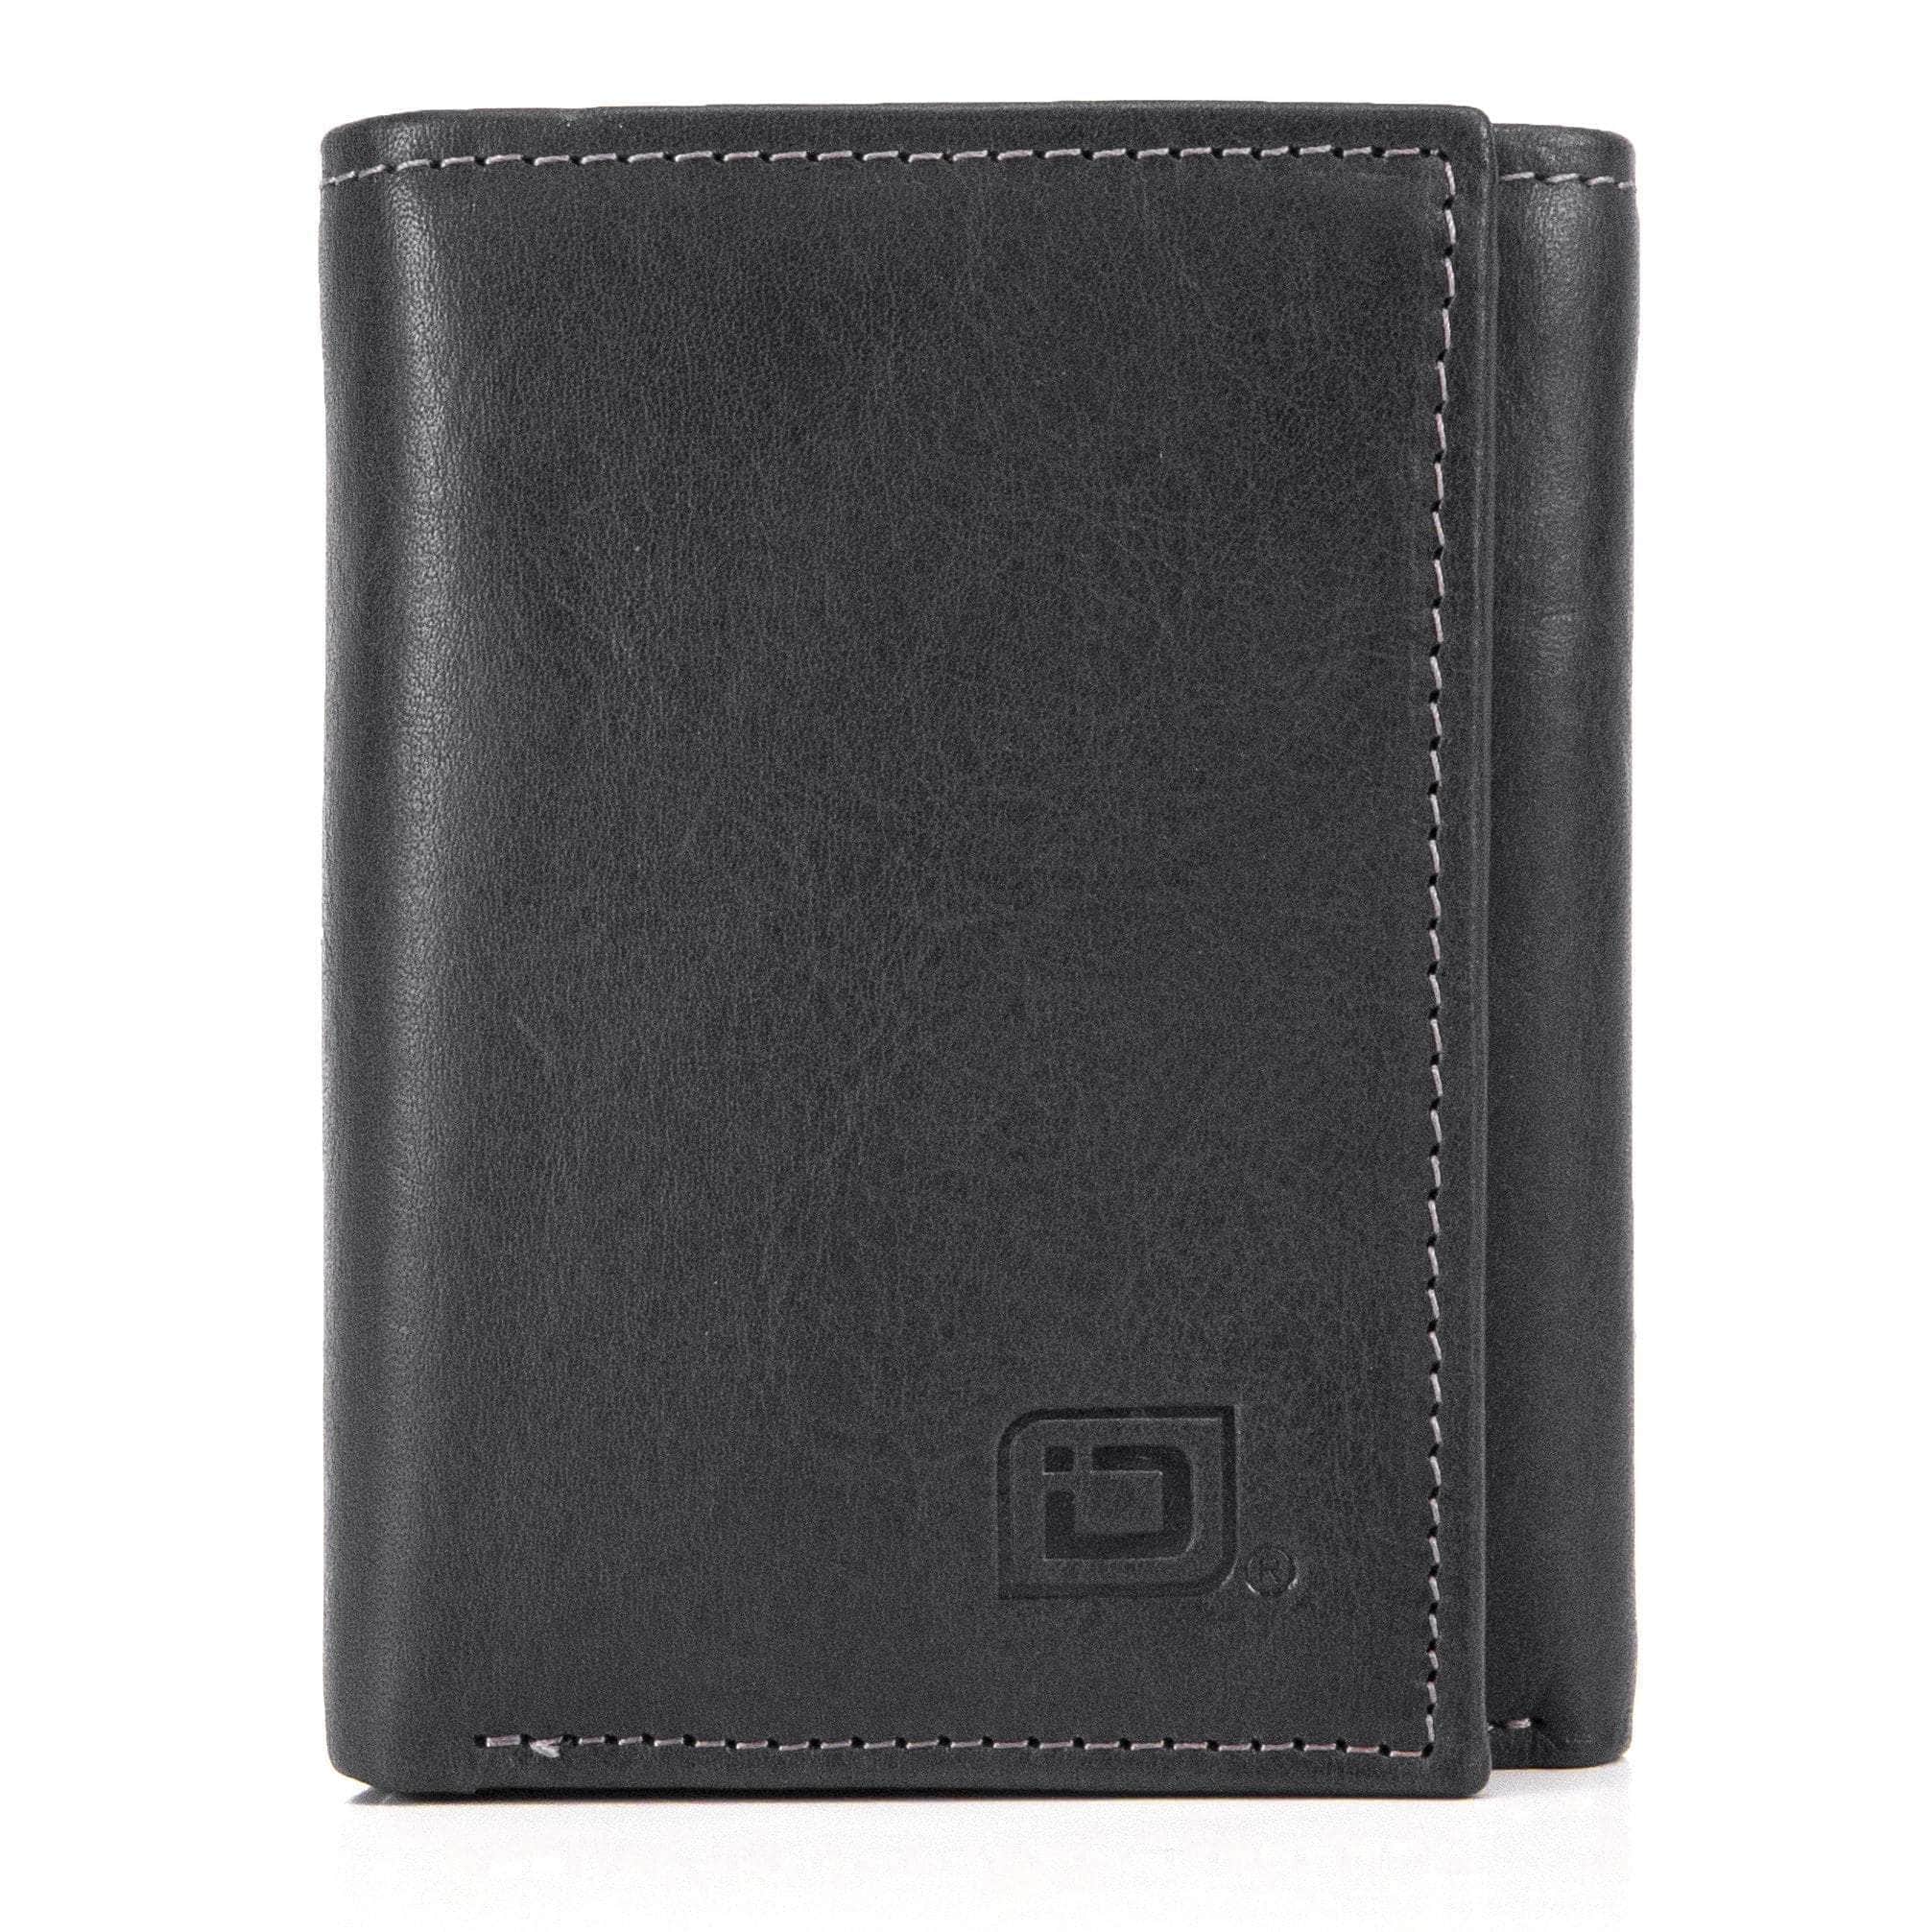 ID Stronghold Men's Wallet Black Italian Leather Trifold Wallet with 2 ID Windows